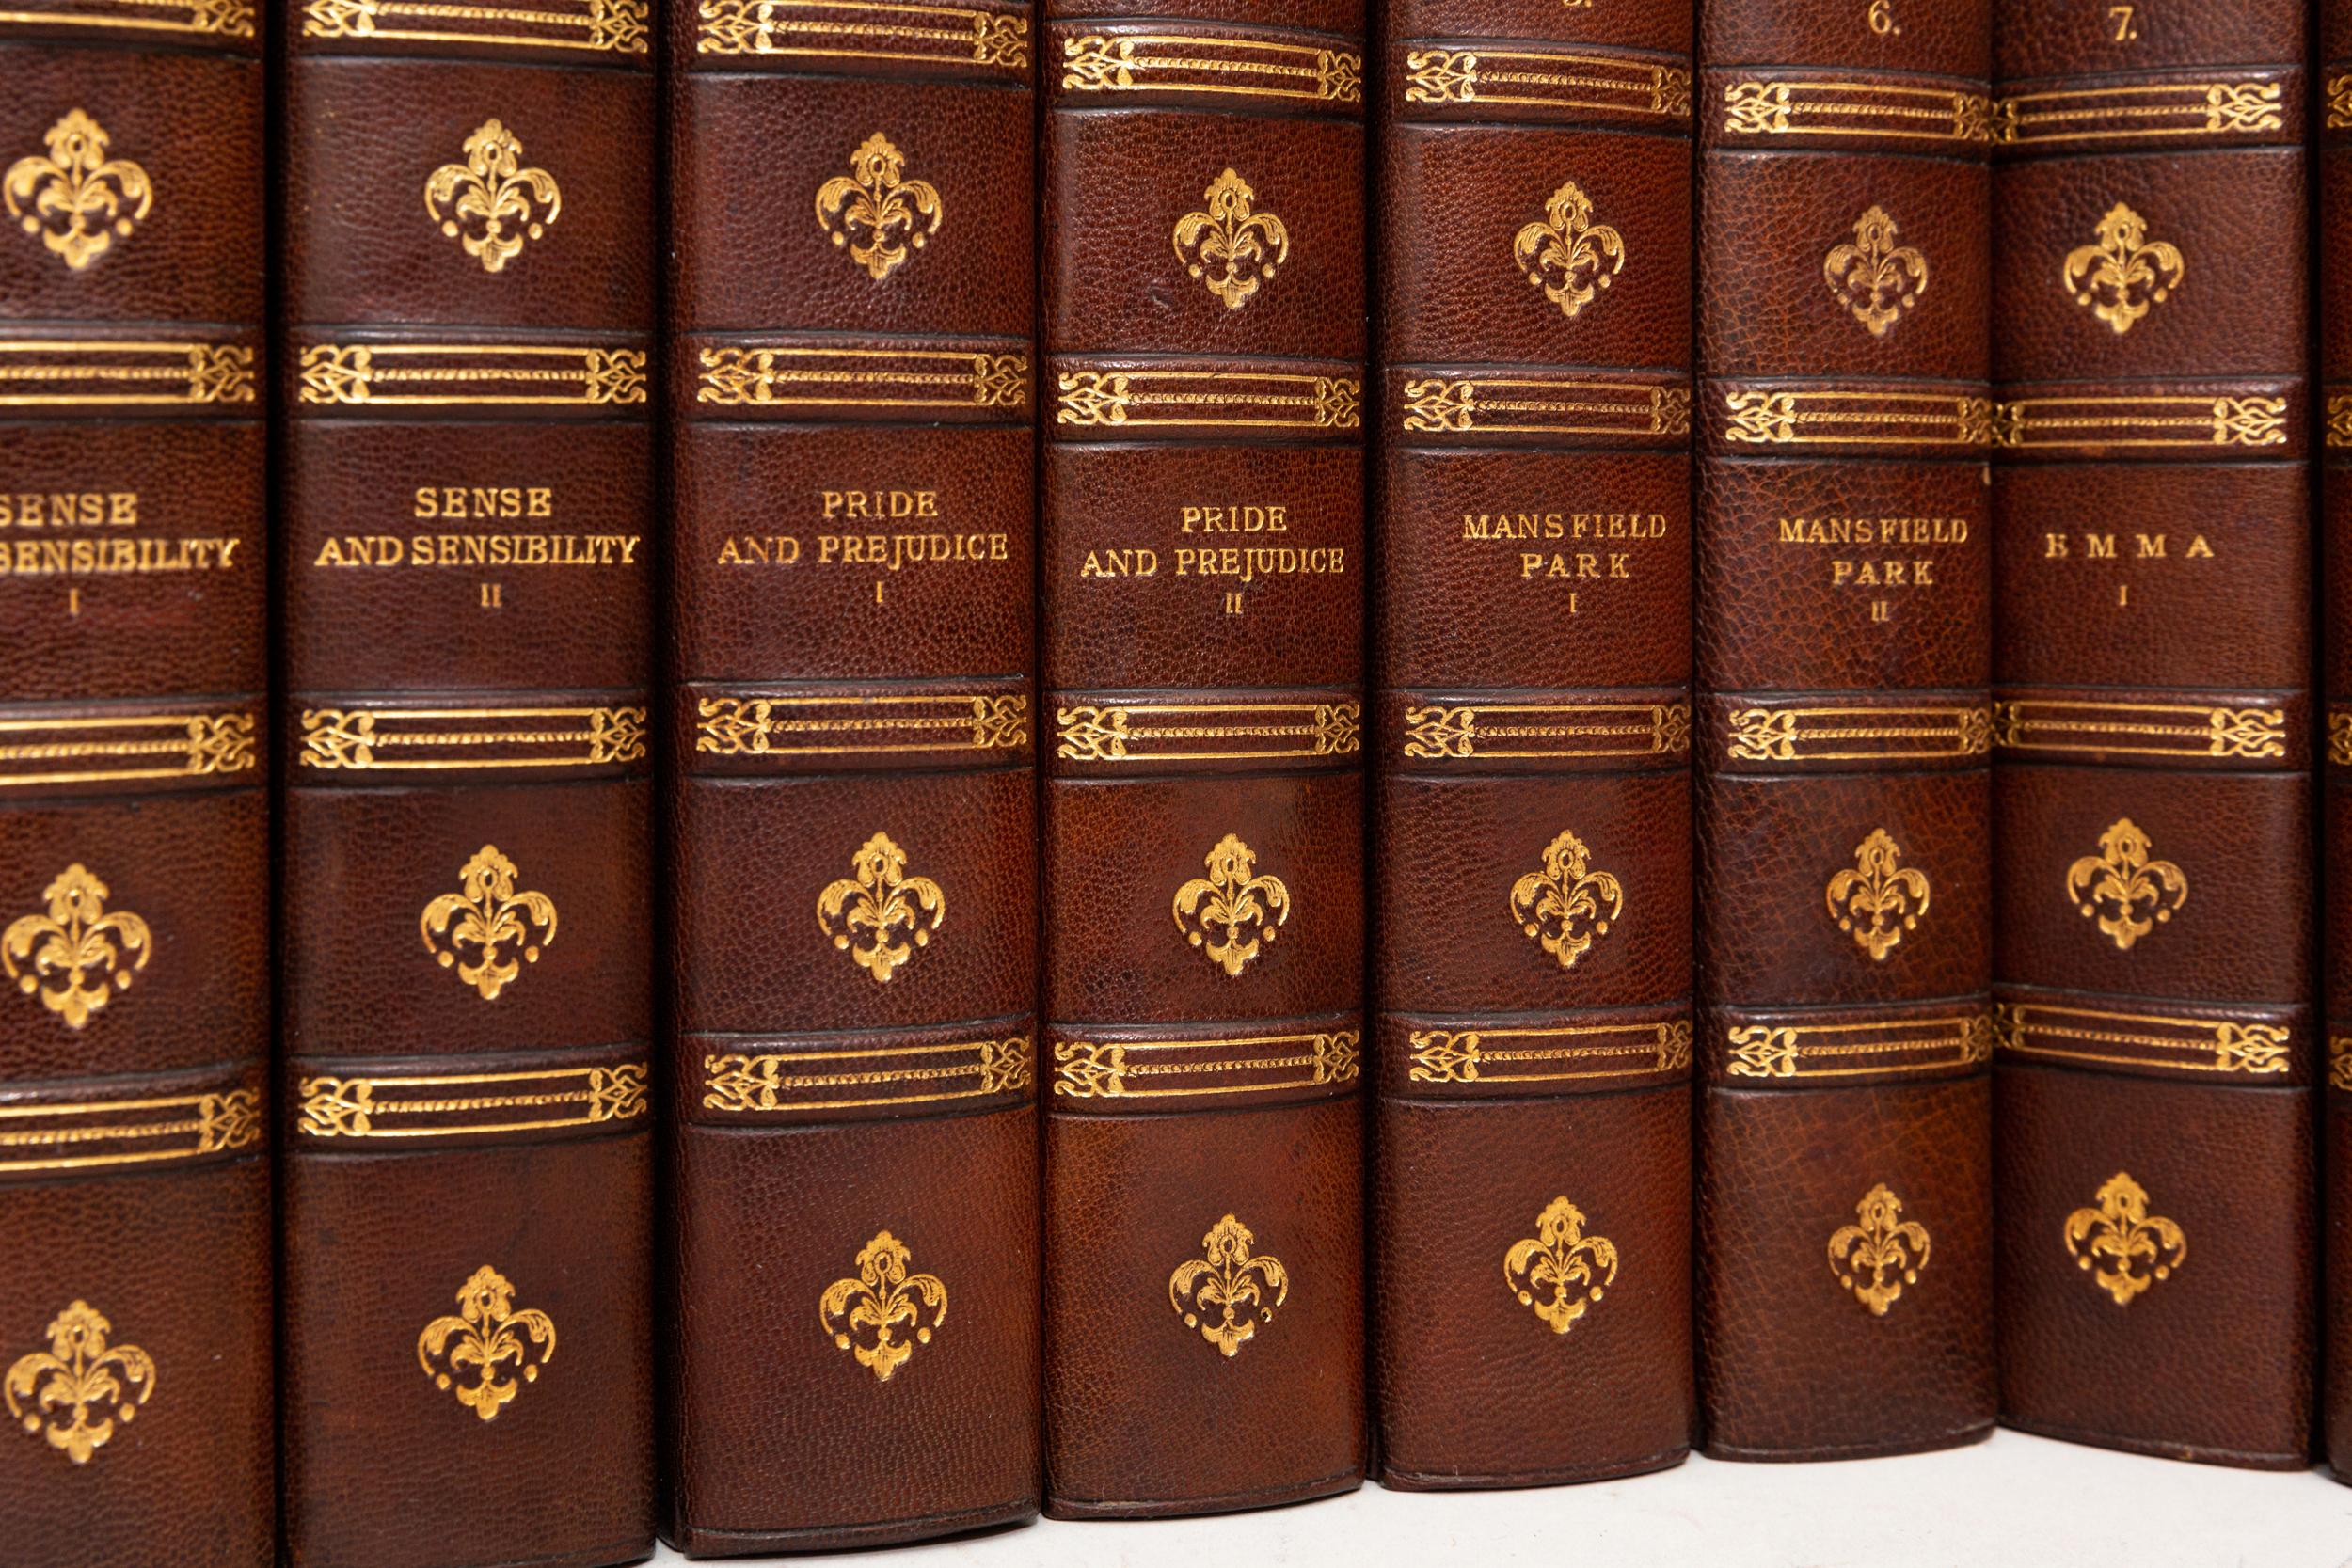 12 Volumes. Jane Austen, The Novels of Jane Austen. Bound in 3/4 tan morocco. Green linen boards. Raised bands. Decorative gilt-tooled symbols on spines. Top edges gilt. Marbled endpapers. Bound by Bayntun. Winchester Edition. Published: Edinburgh;